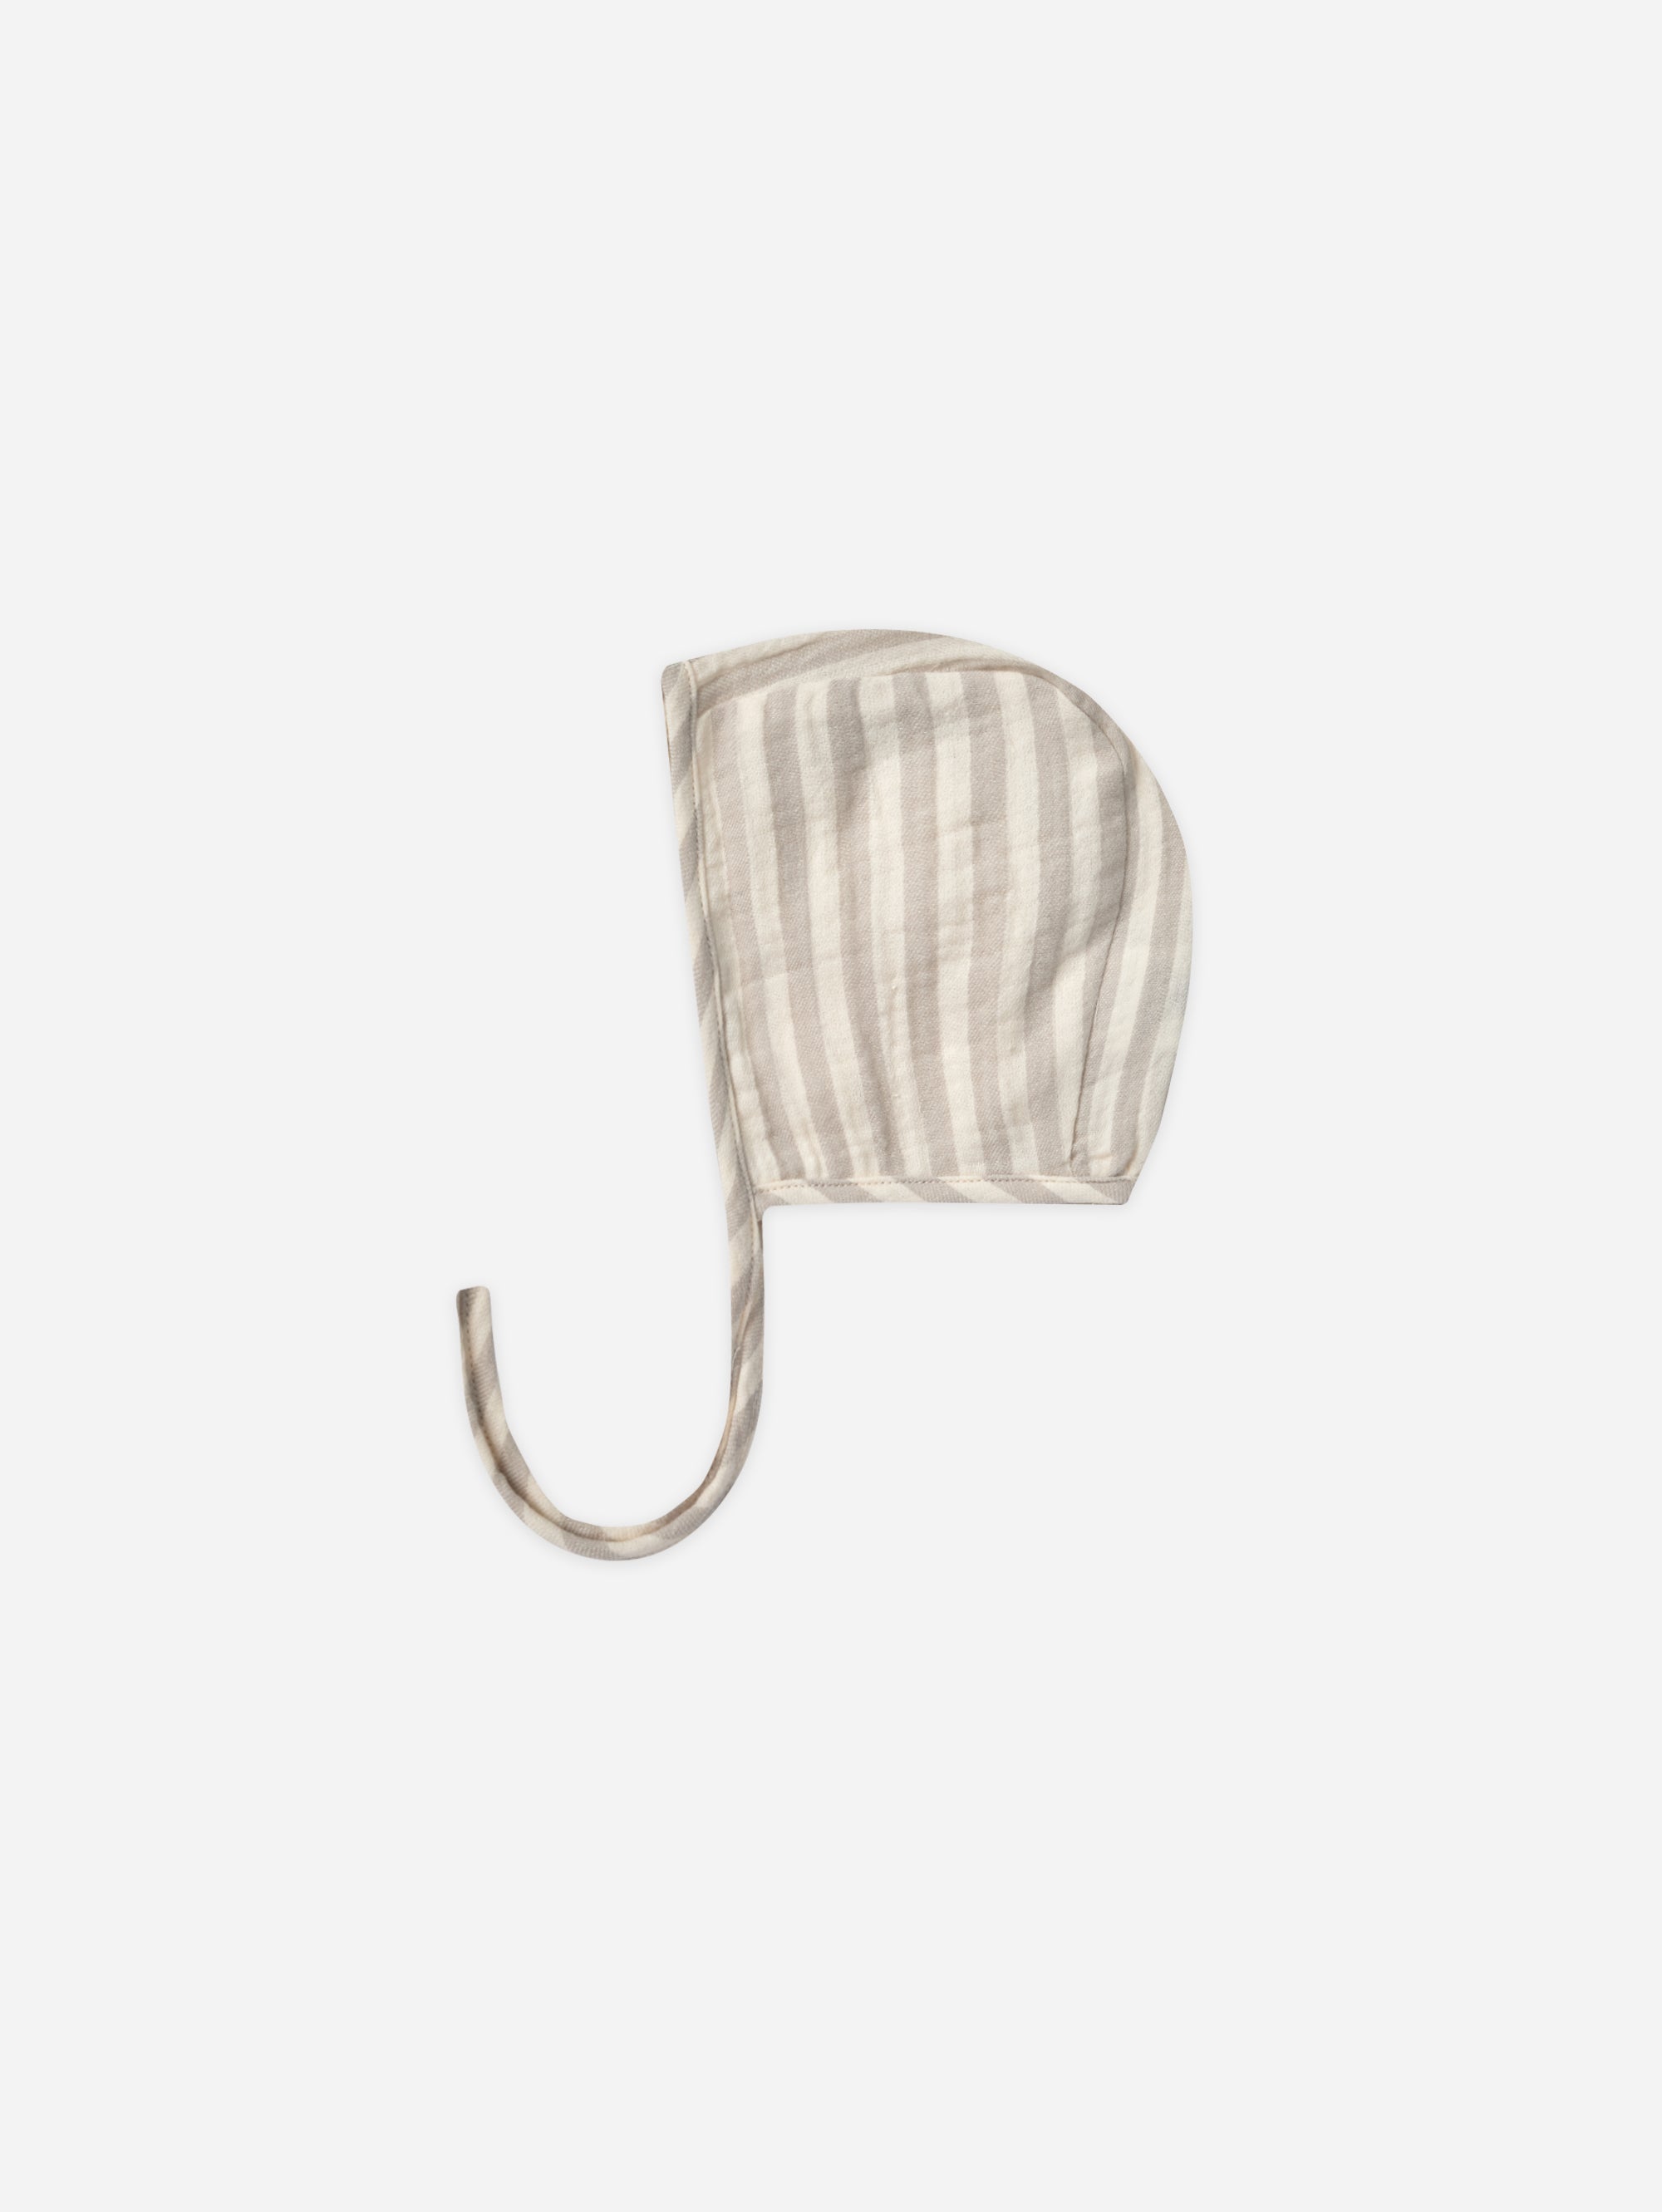 Baby Bonnet || Ash Stripe - Rylee + Cru | Kids Clothes | Trendy Baby Clothes | Modern Infant Outfits |